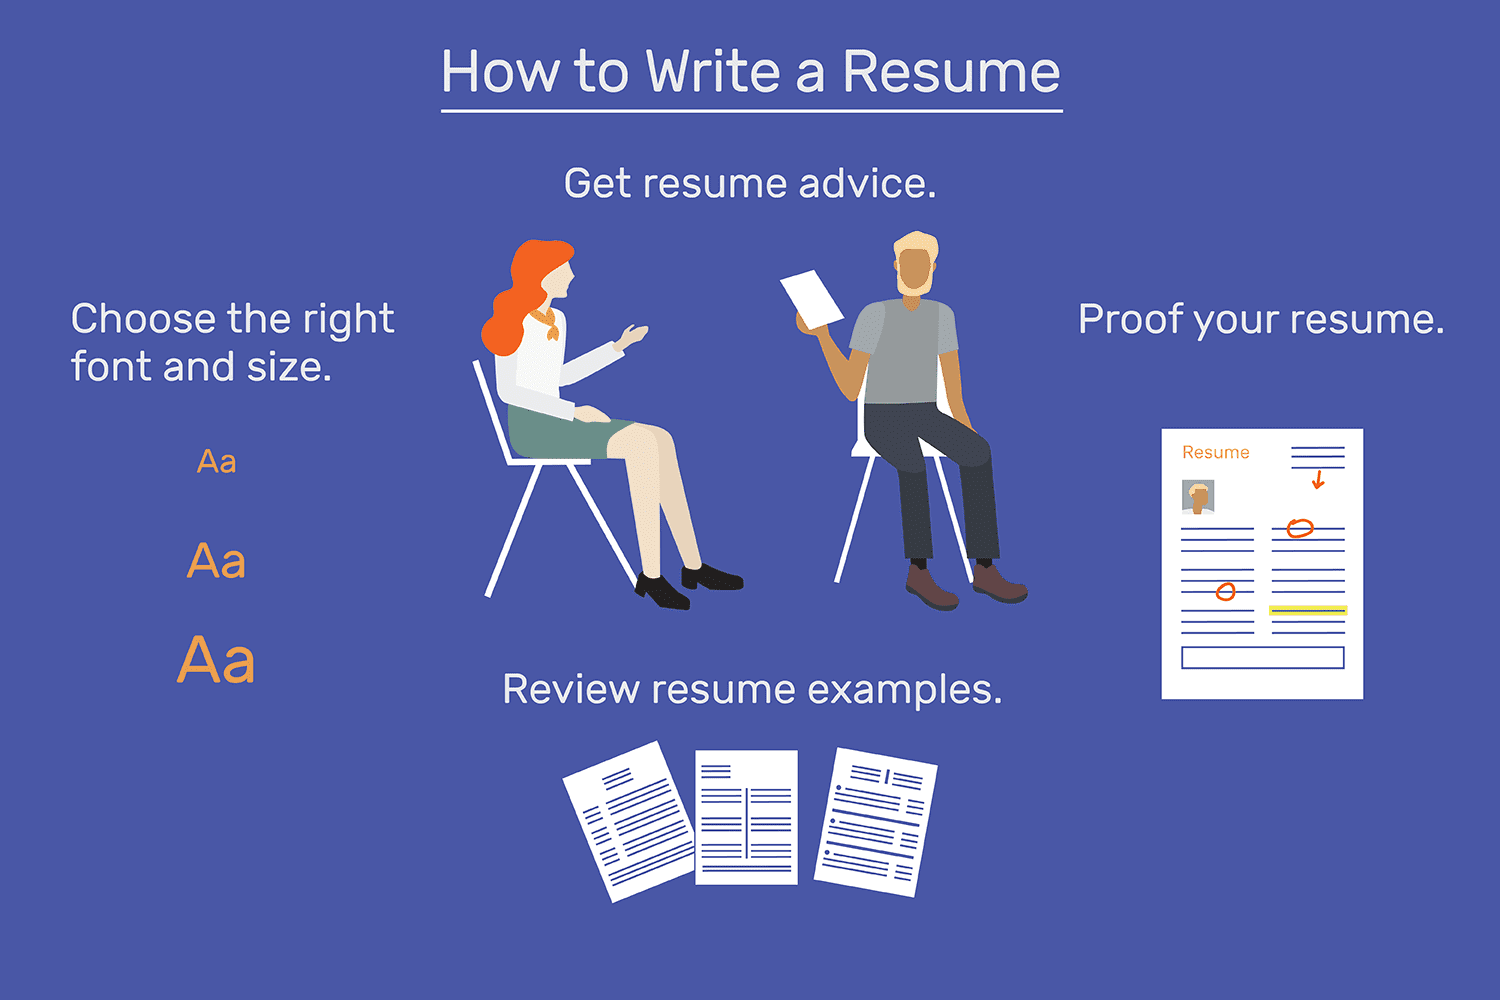 How to Write a Resume for High Schoolers?